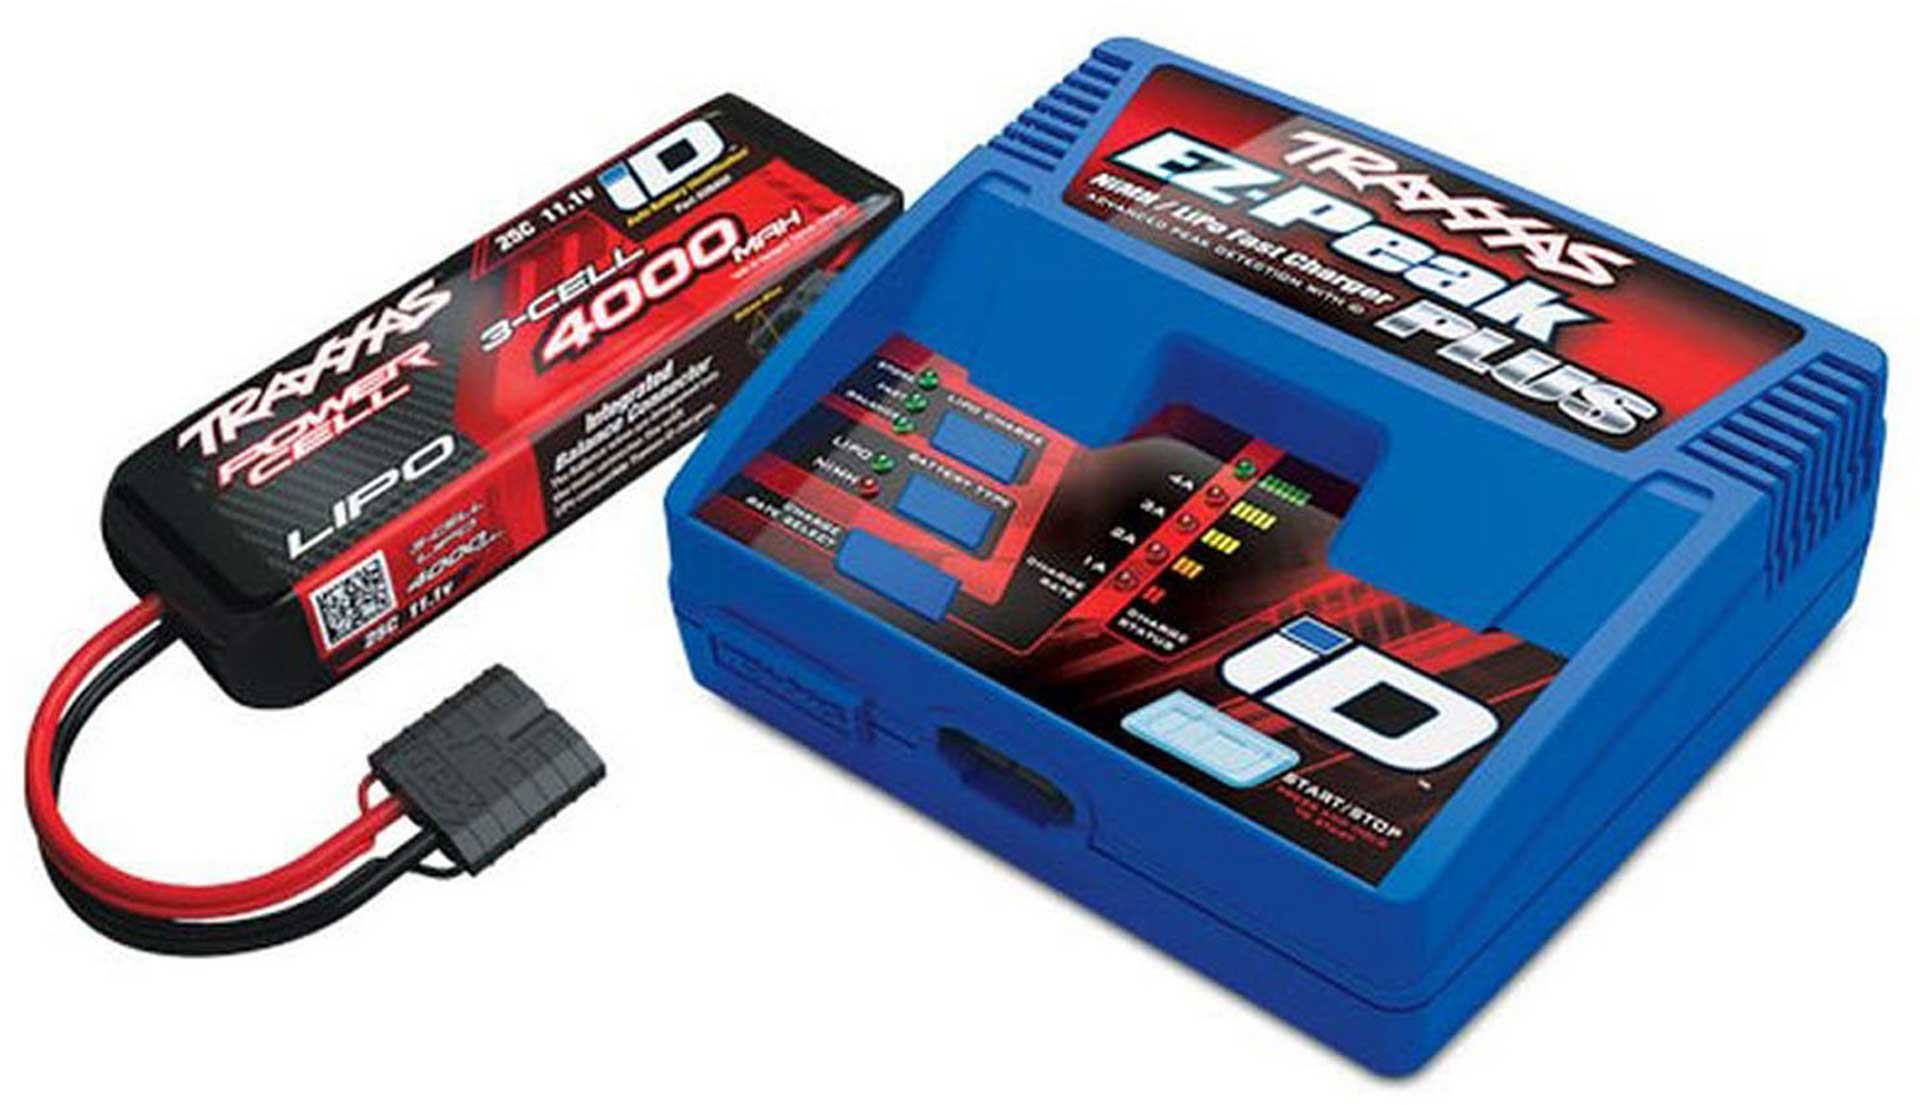 TRAXXAS PACK COMPLET AVEC CHARGEUR ID 2970GX +2849X 4000MAH 11.1V LIPO